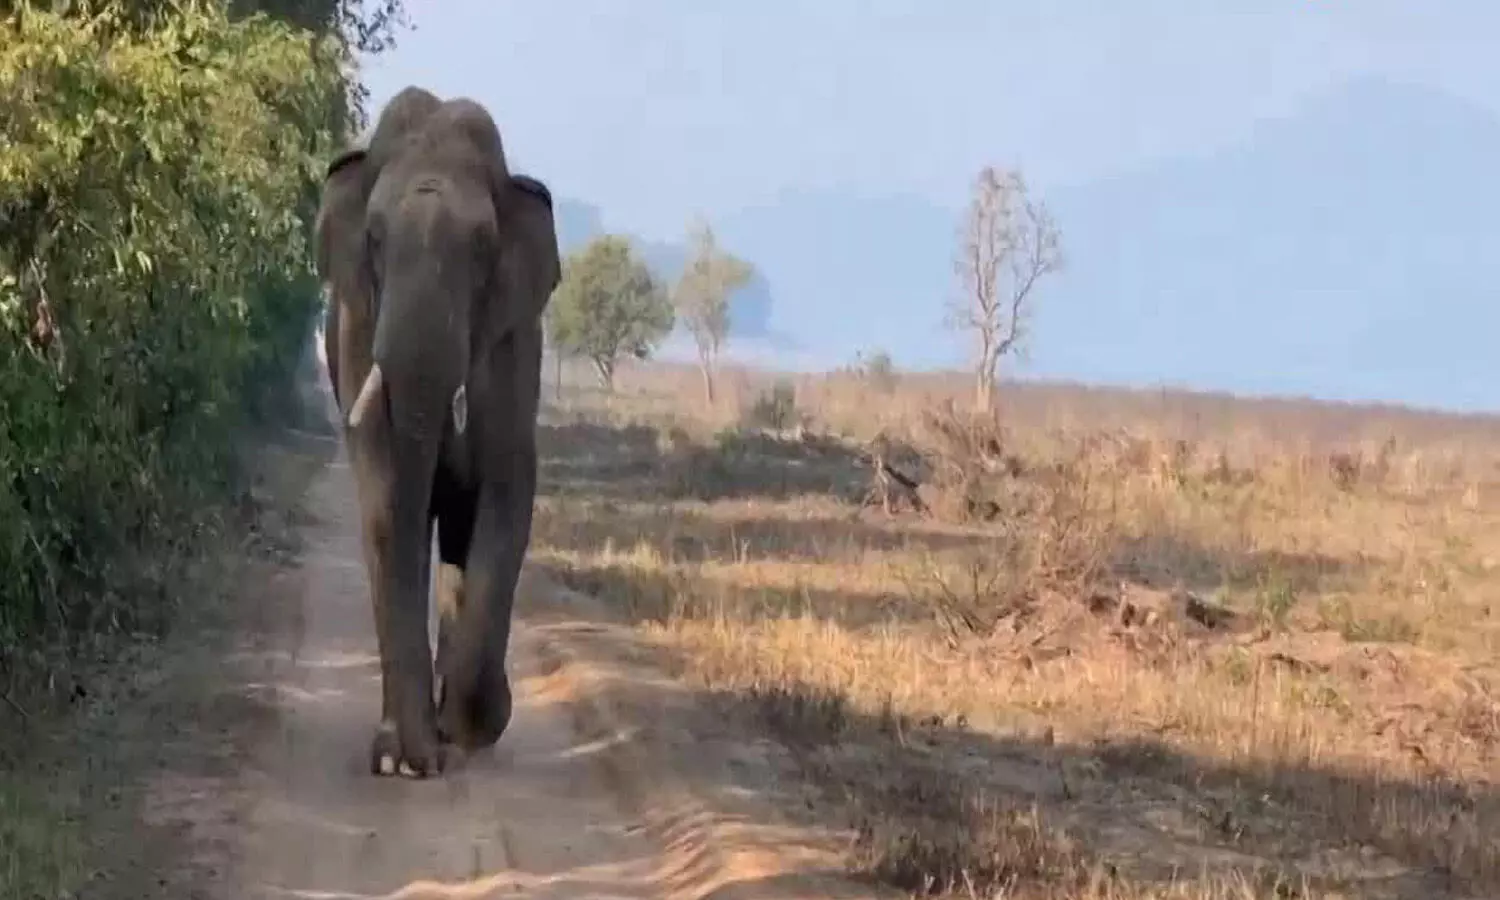 Its Viral! People cant get enough of this elephants Ramp walk; Watch